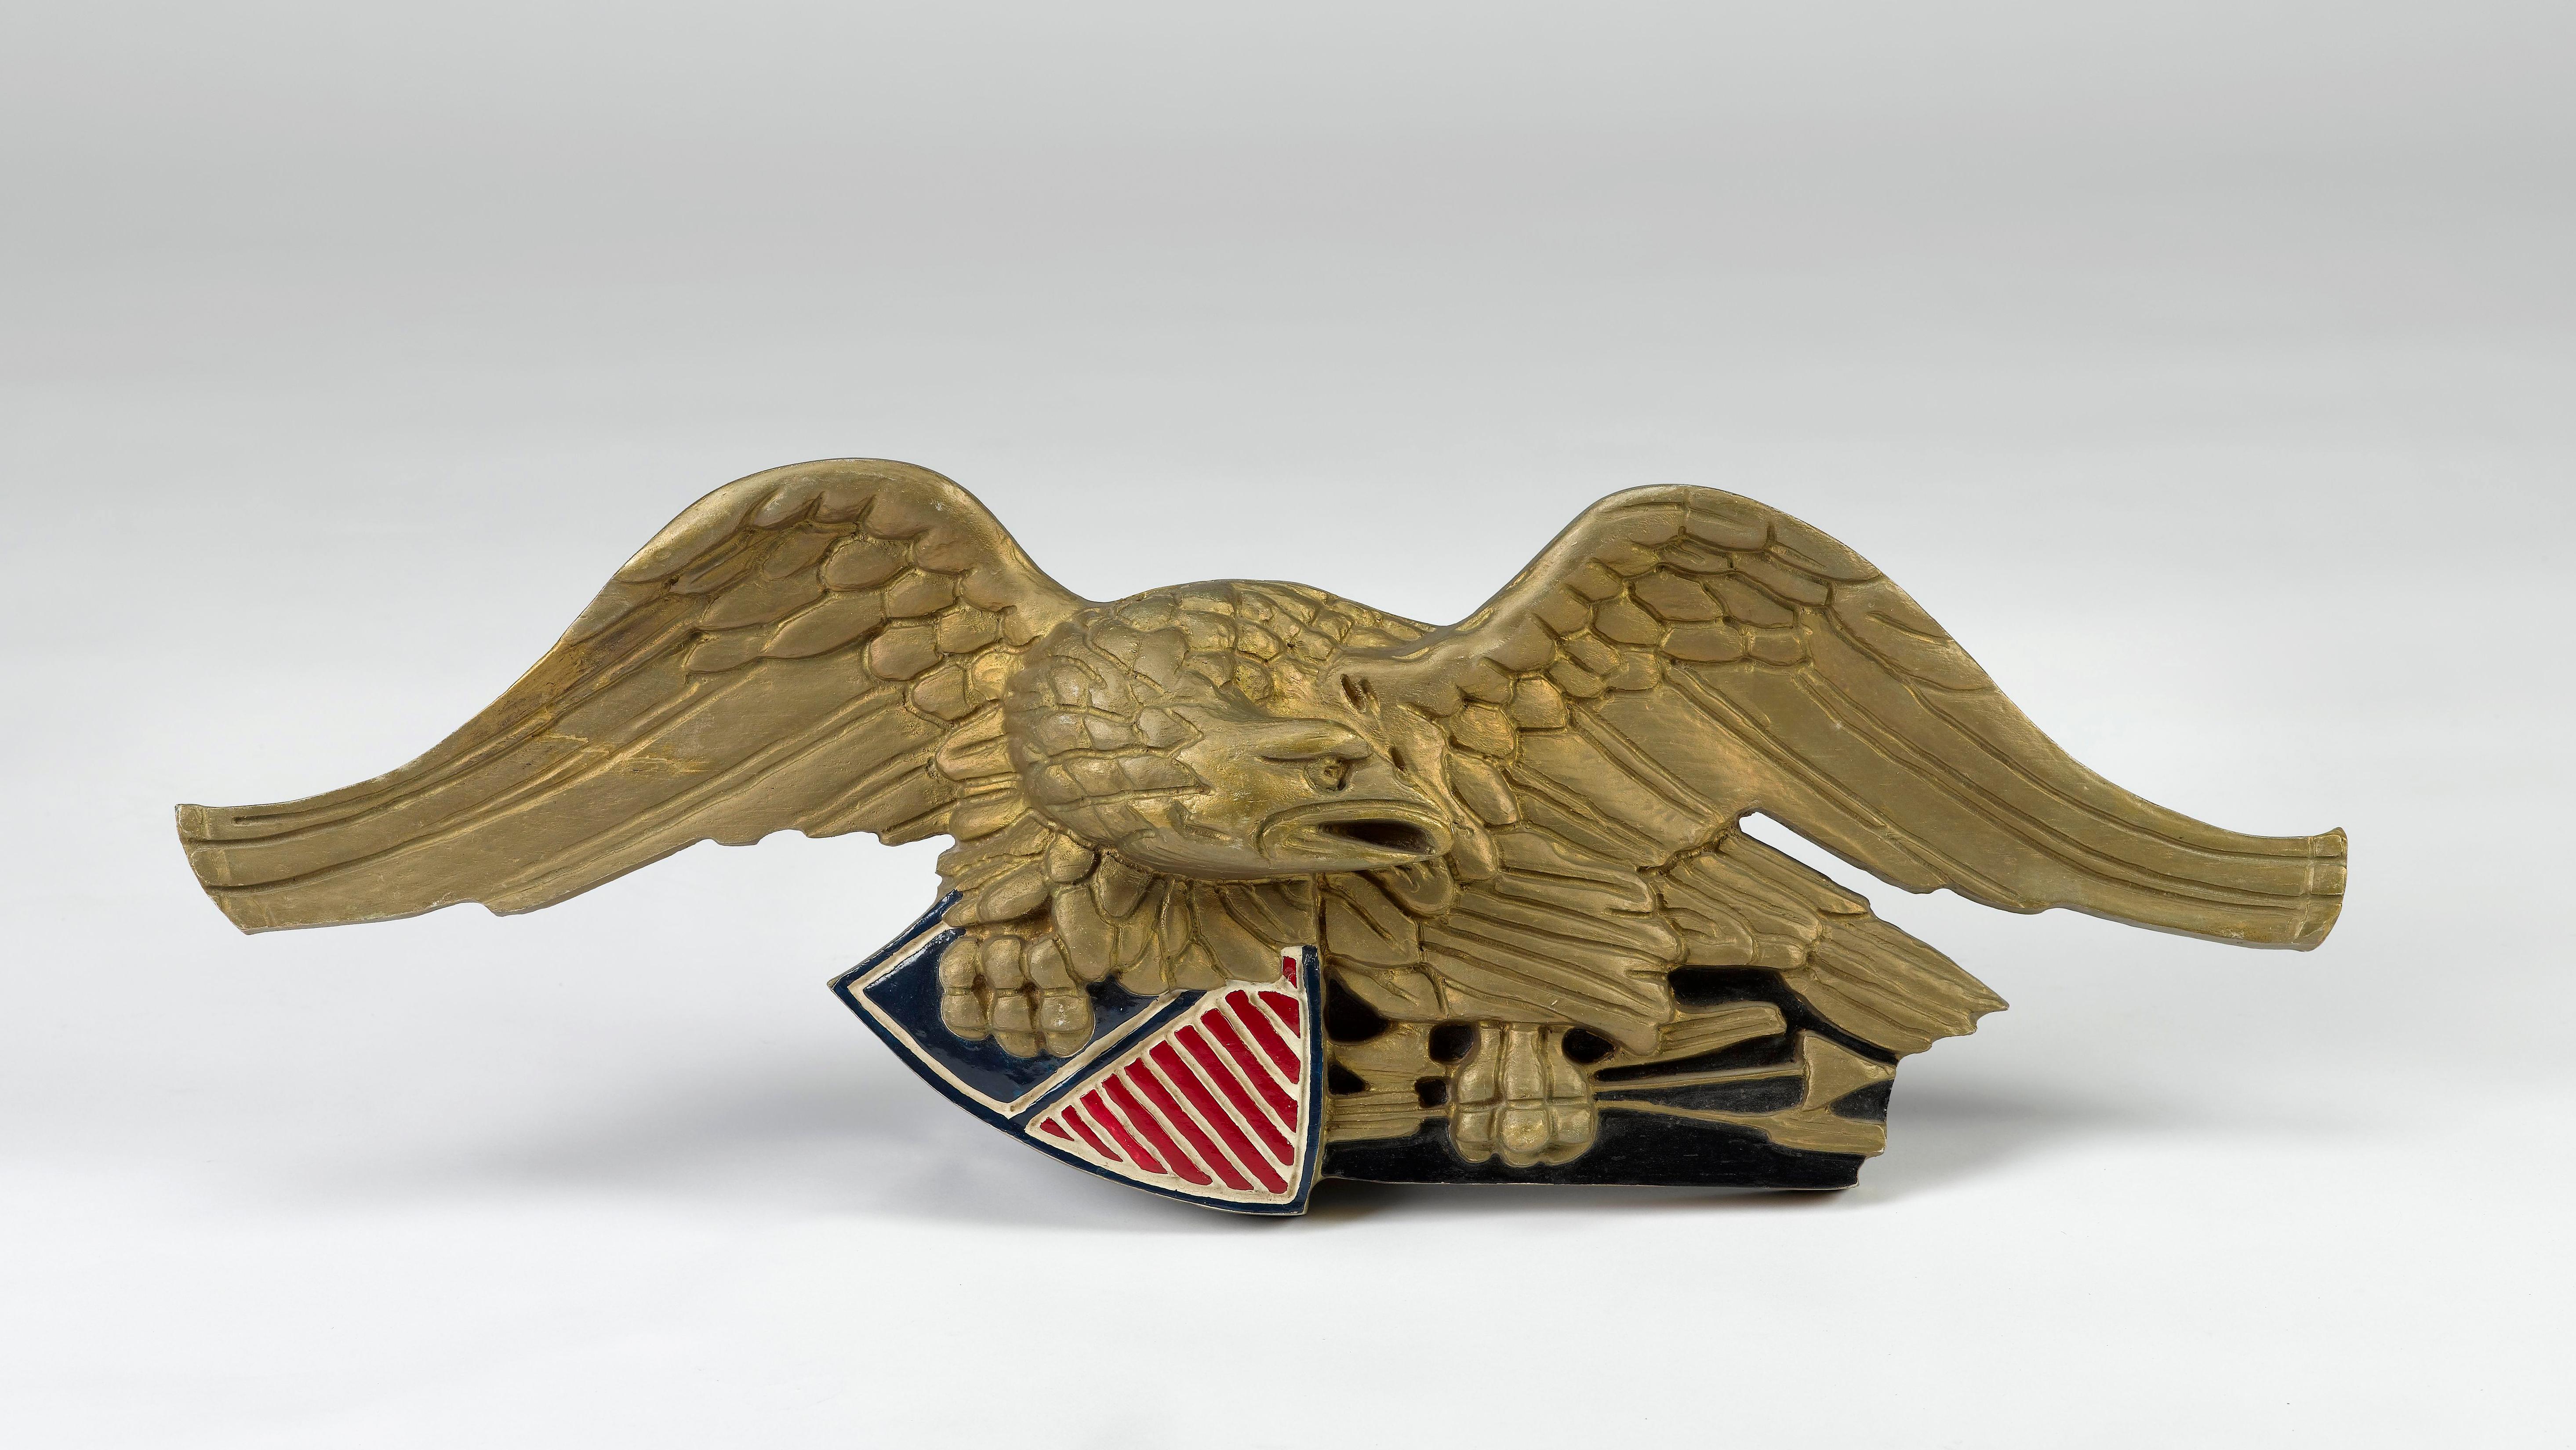 Presented is a vintage, Bellamy-style, hand carved wooden eagle. This late 19th century to early 20th century wood eagle is bronze-brushed with a painted red, white, and blue shield. It supports a shield in its right talon as the head looks to its